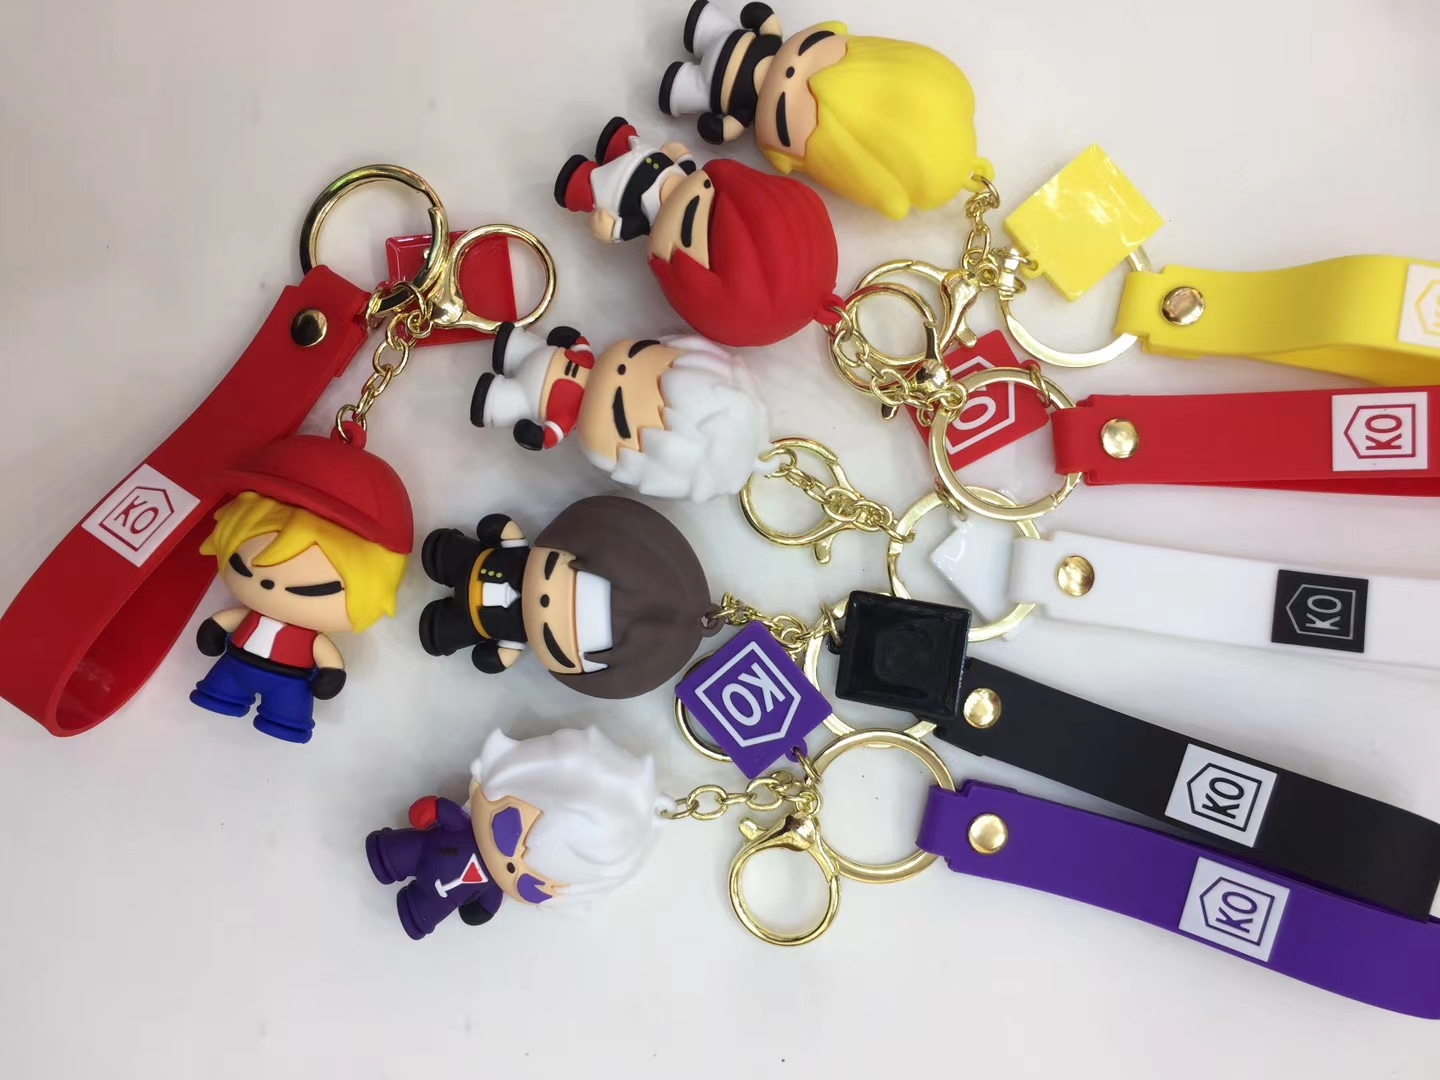 king of fighter anime figure keychain price for 1 pcs